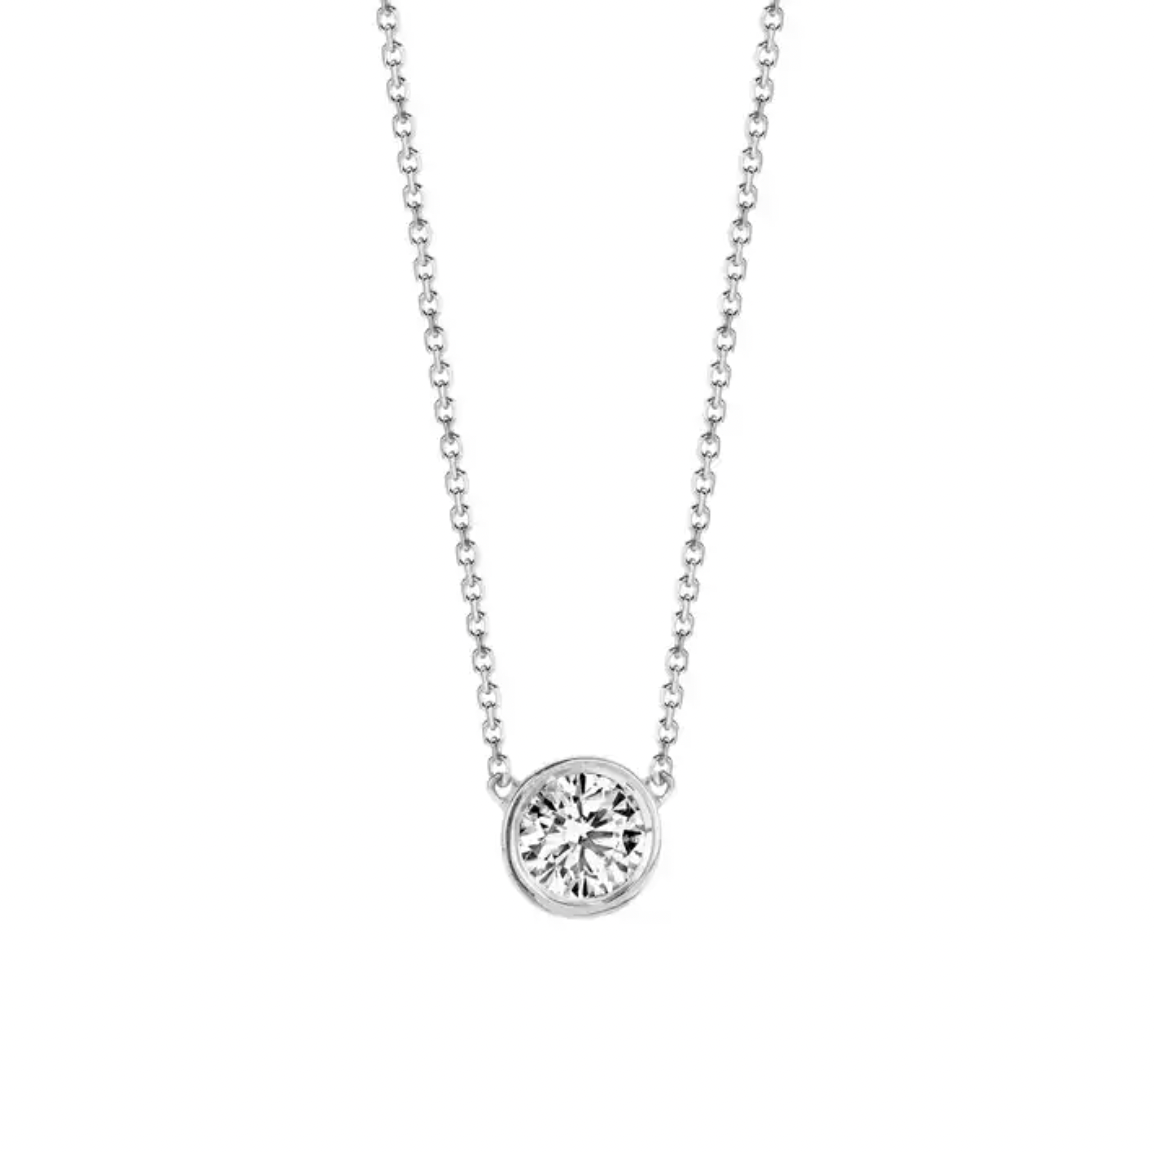  Featherly adjustable cubic zirconia bezel necklace in 925 sterling silver 